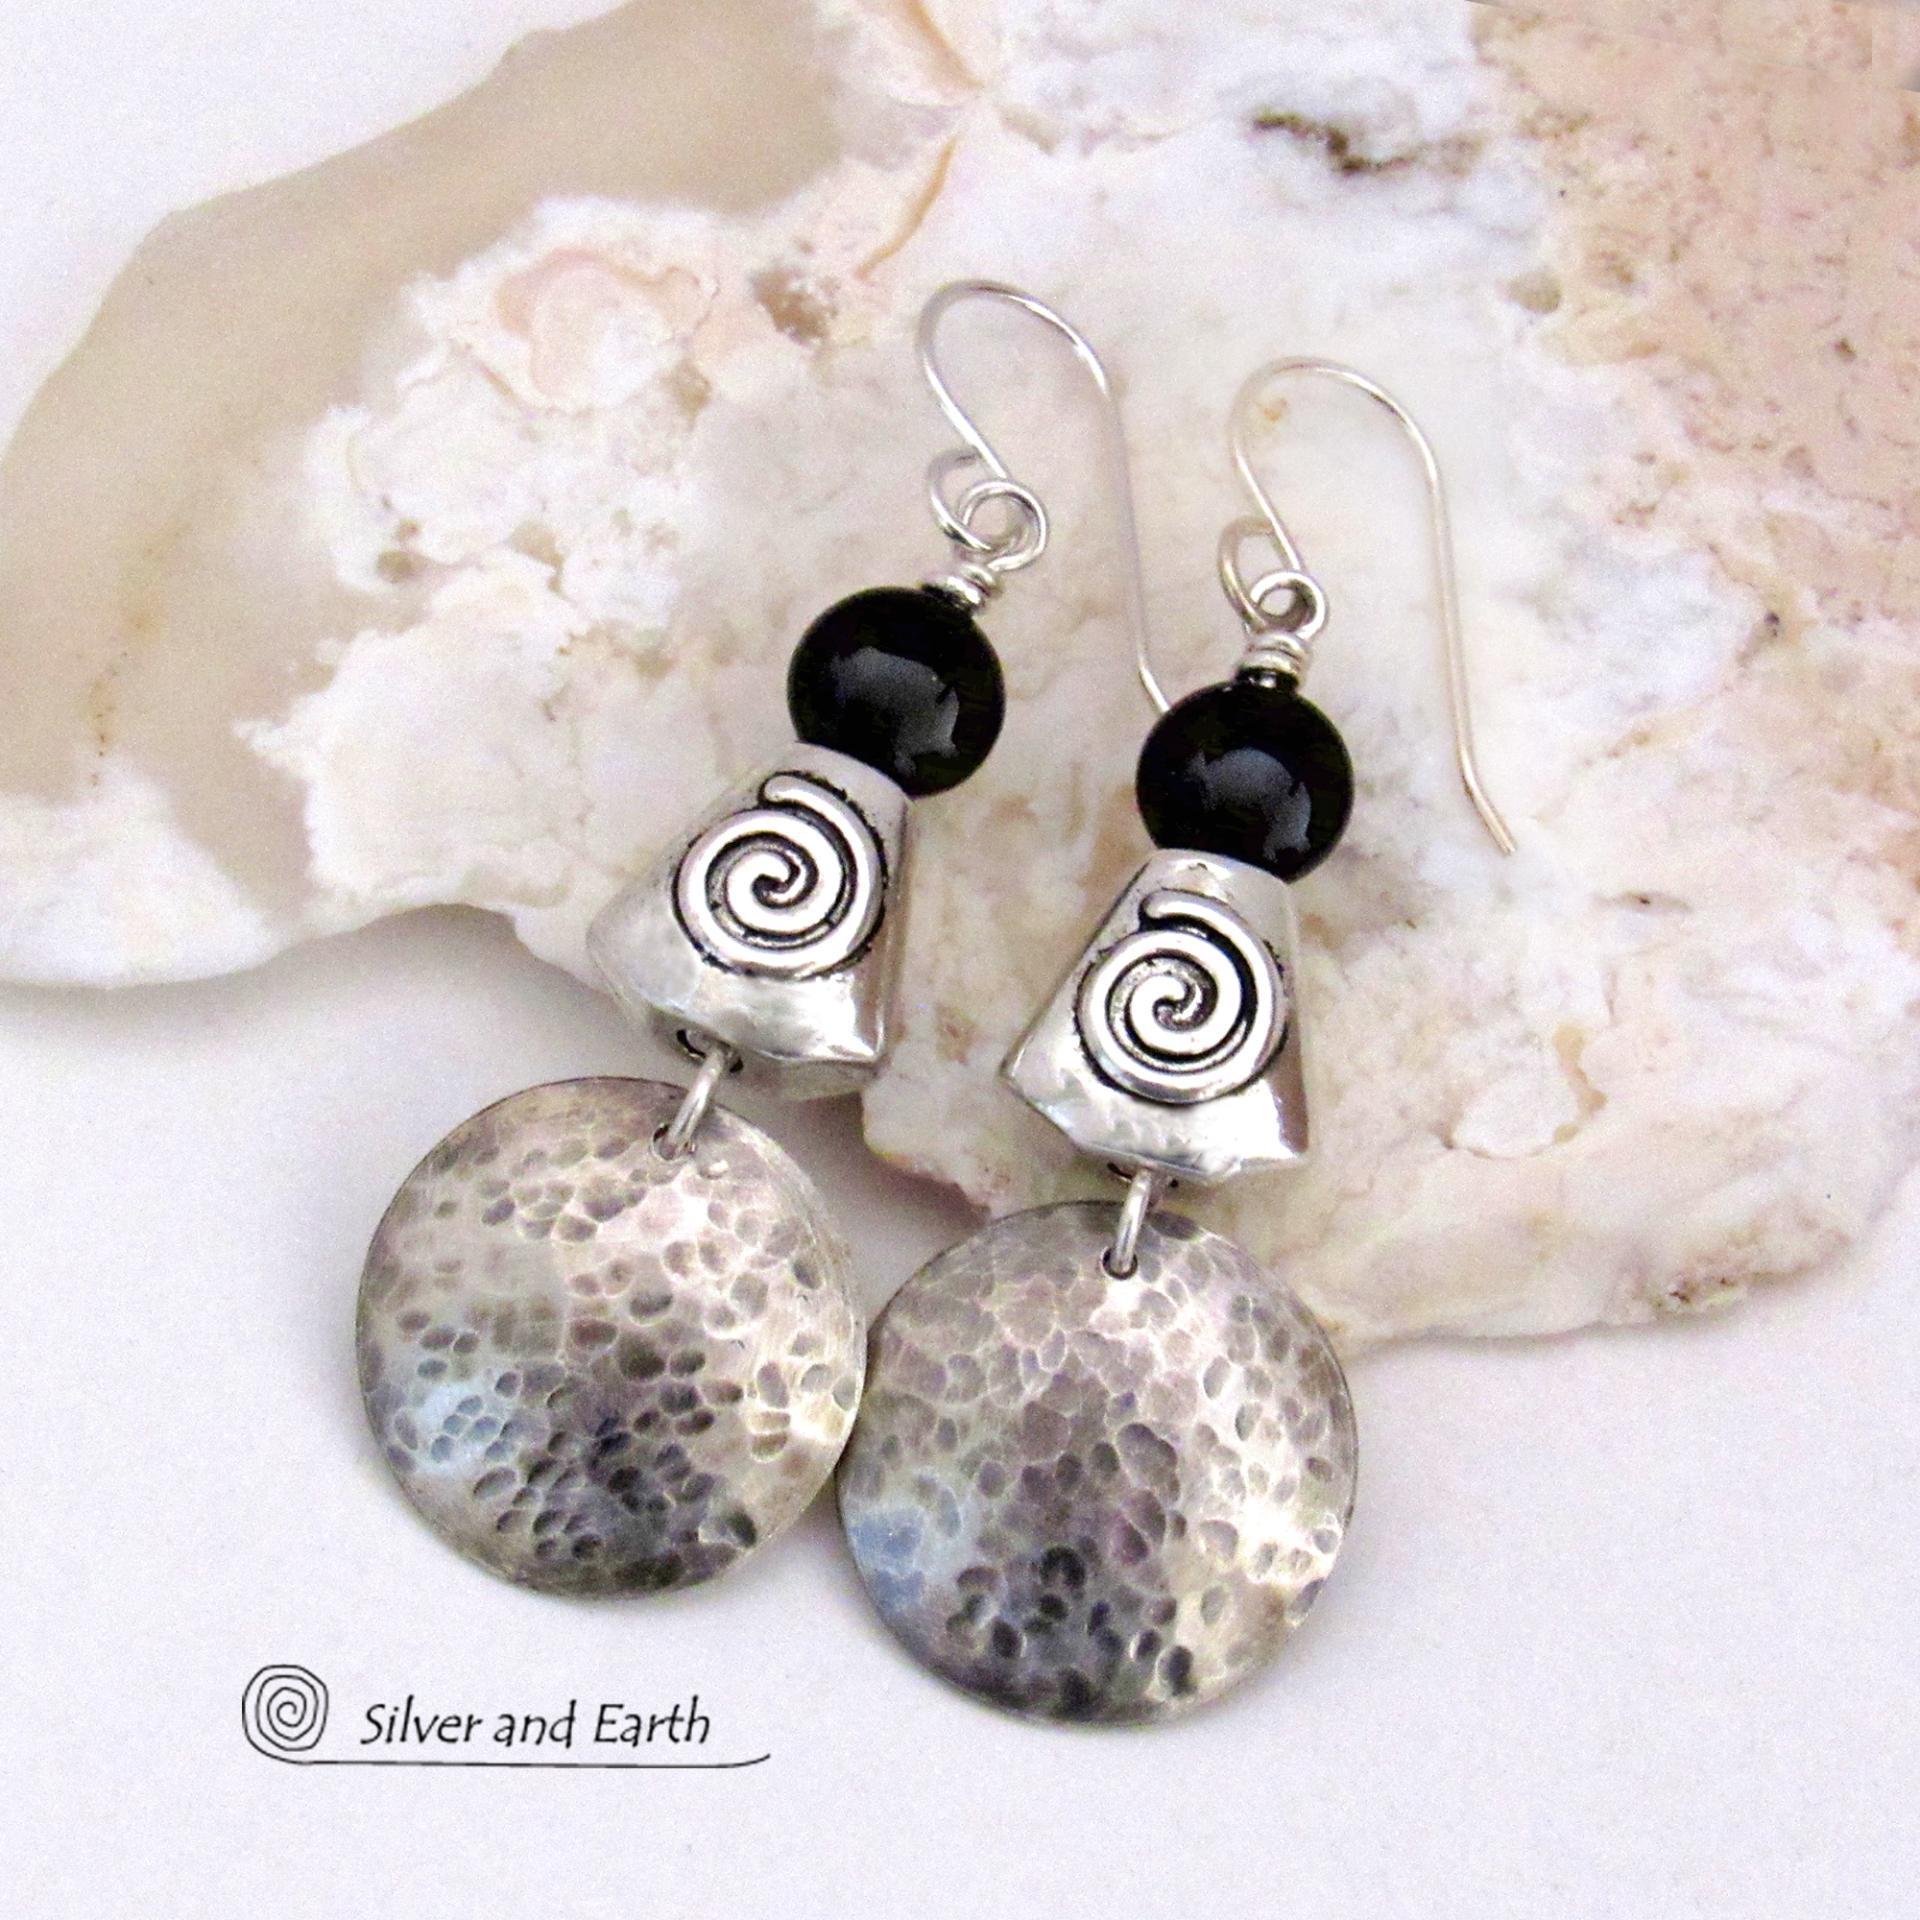 Hammered Sterling Silver Earrings with Spiral Beads & Black Onyx Stone |  Silver and Earth Jewelry